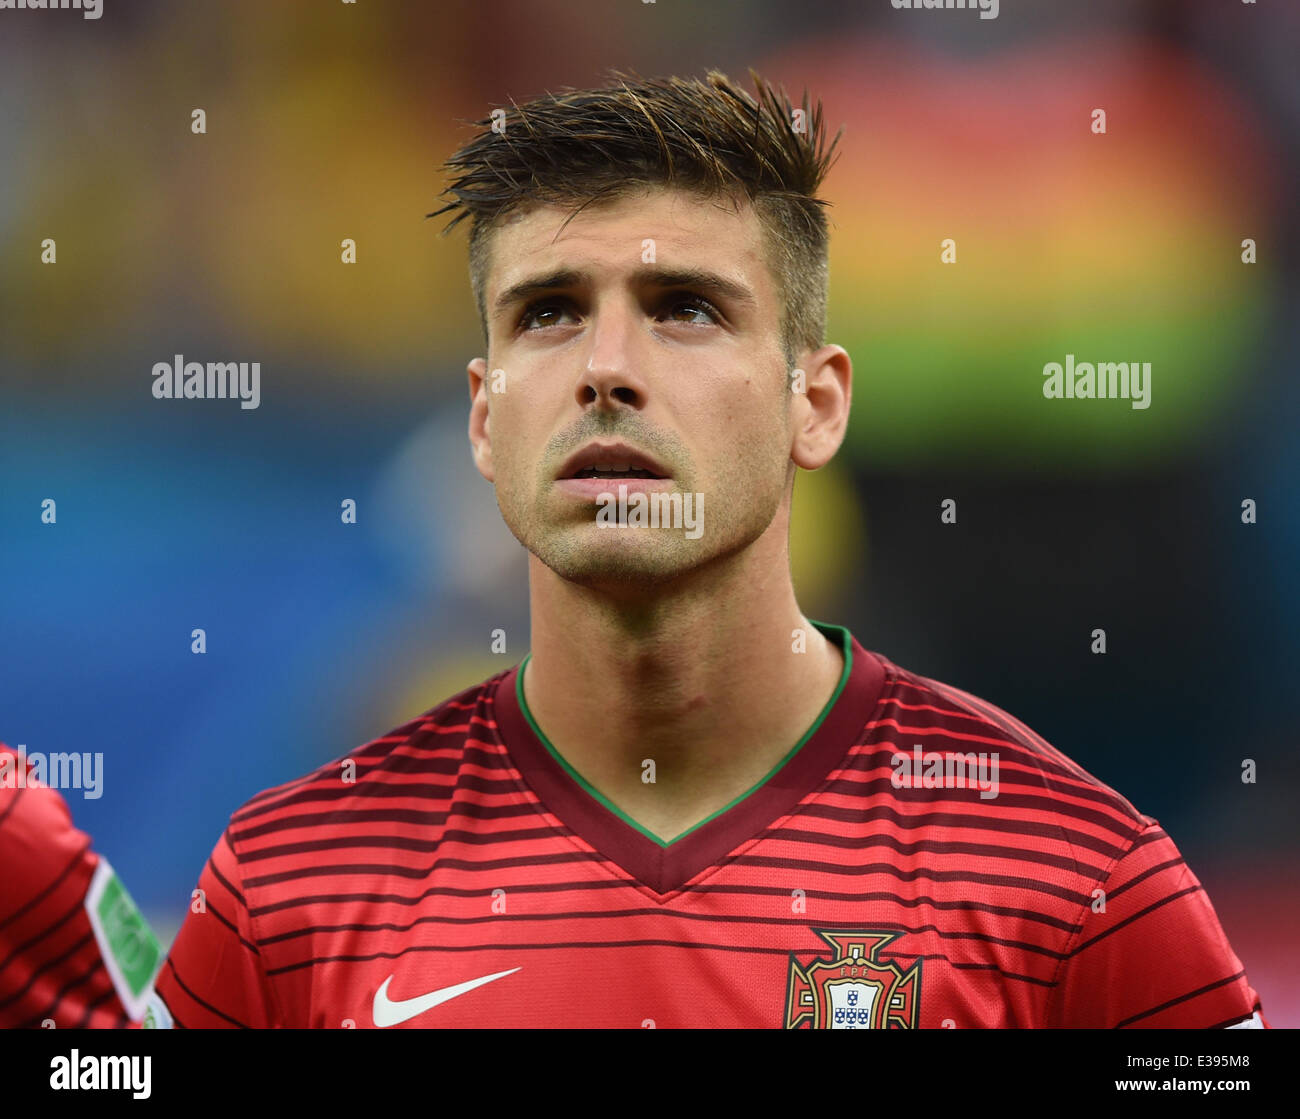 Manaus, Brazil. 22nd June, 2014. Miguel Veloso of Portugal seen during the national anthem prior to the FIFA World Cup 2014 group G preliminary round match between the USA and Portugal at the Arena Amazonia Stadium in Manaus, Brazil, 22 June 2014. Photo: Marius Becker/dpa/Alamy Live News Stock Photo